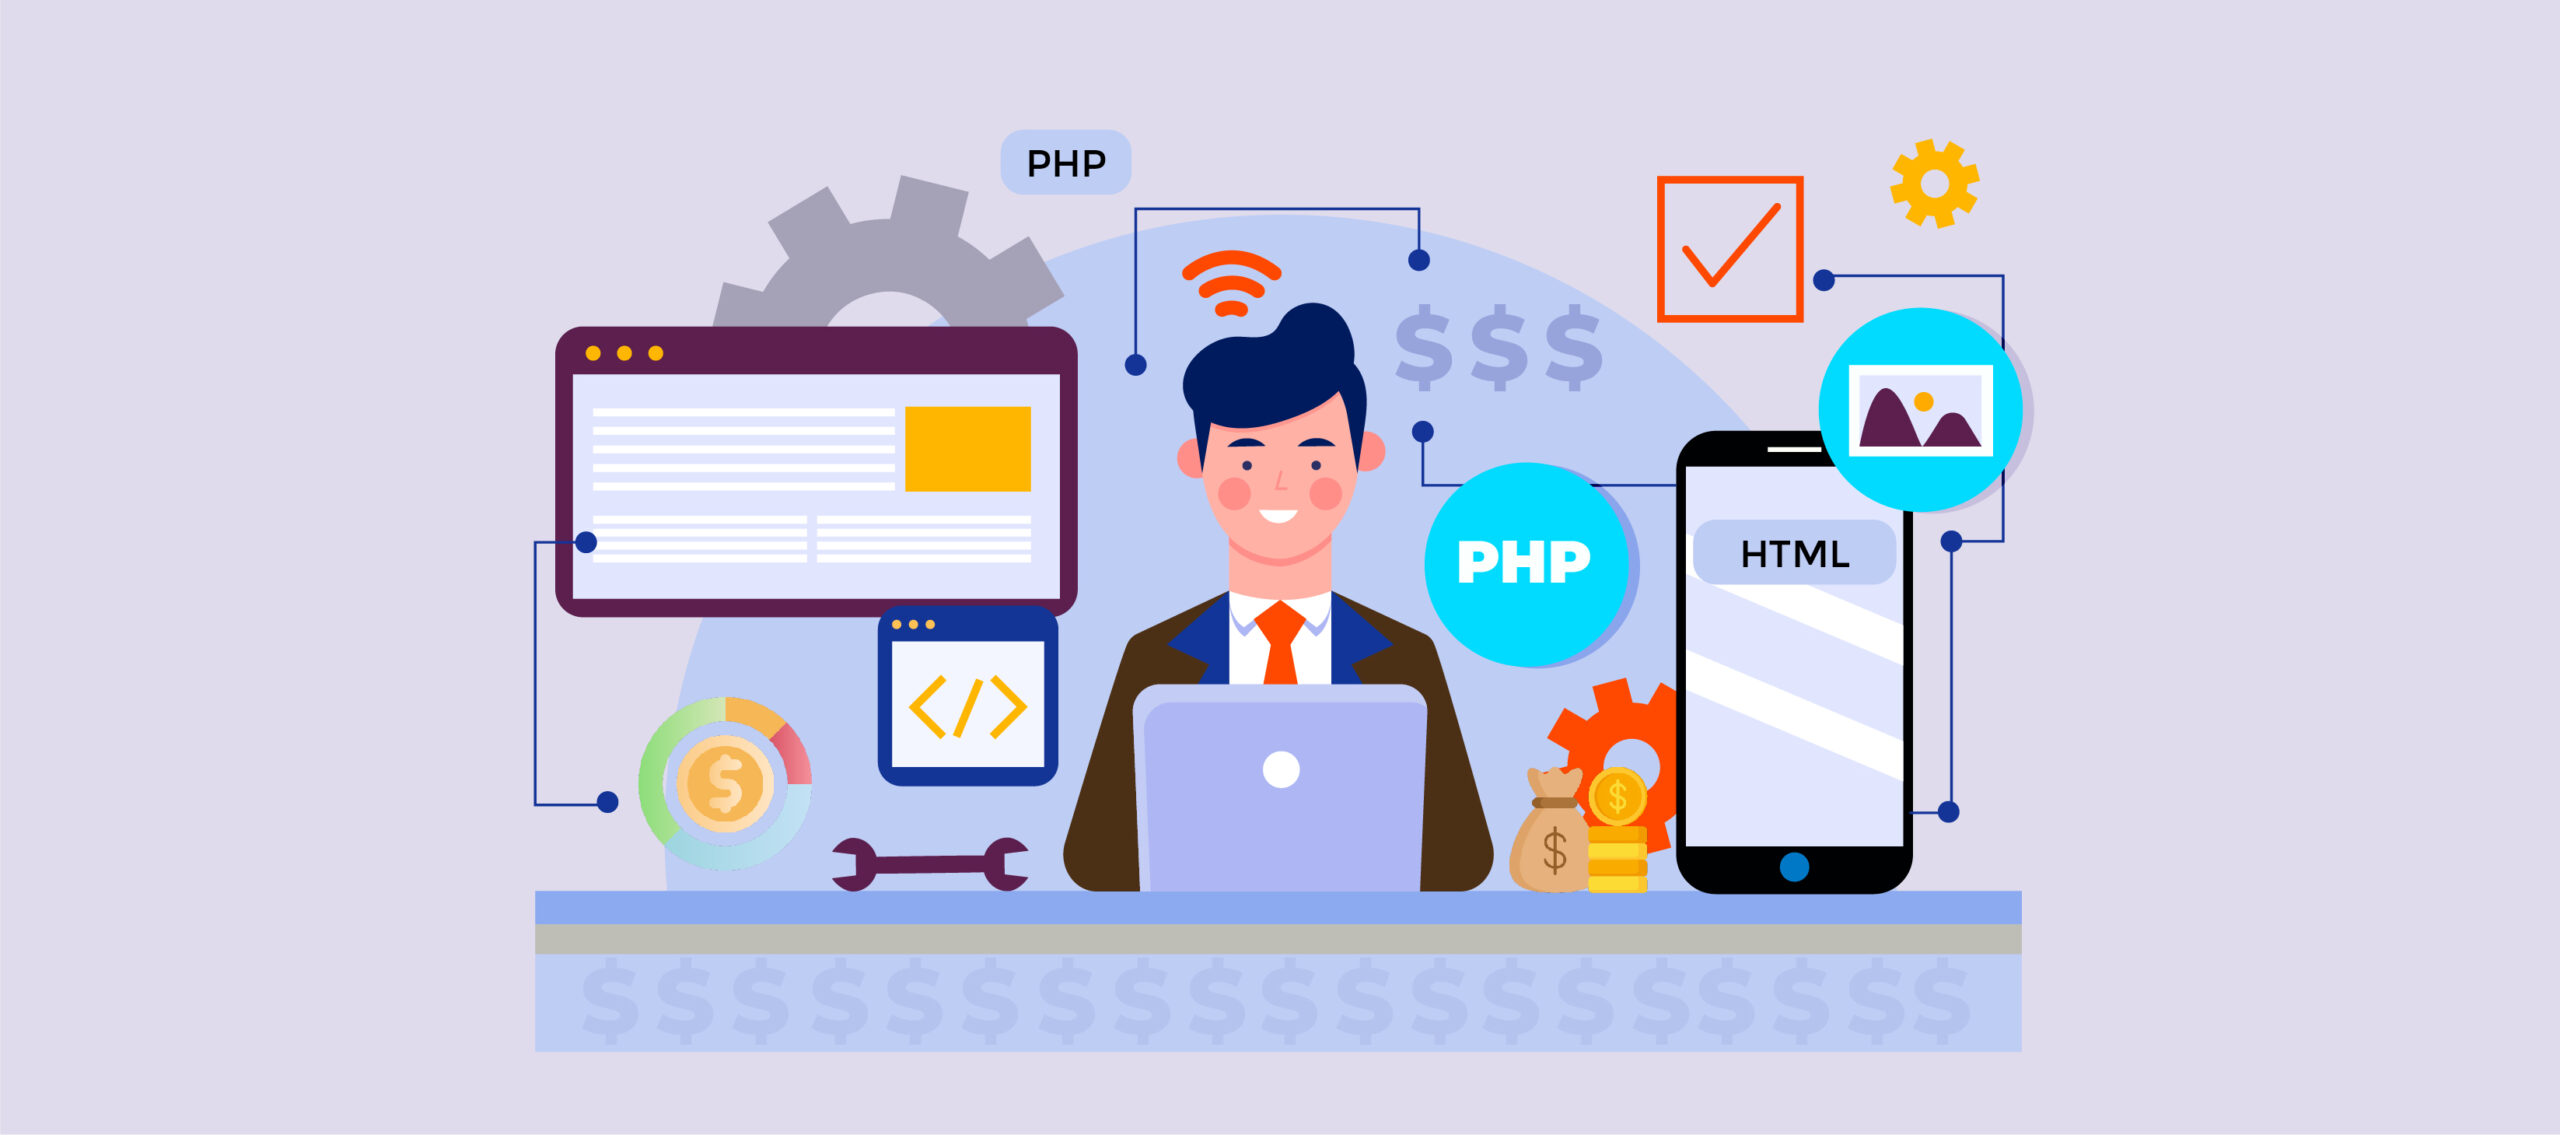 How much does it cost for php development